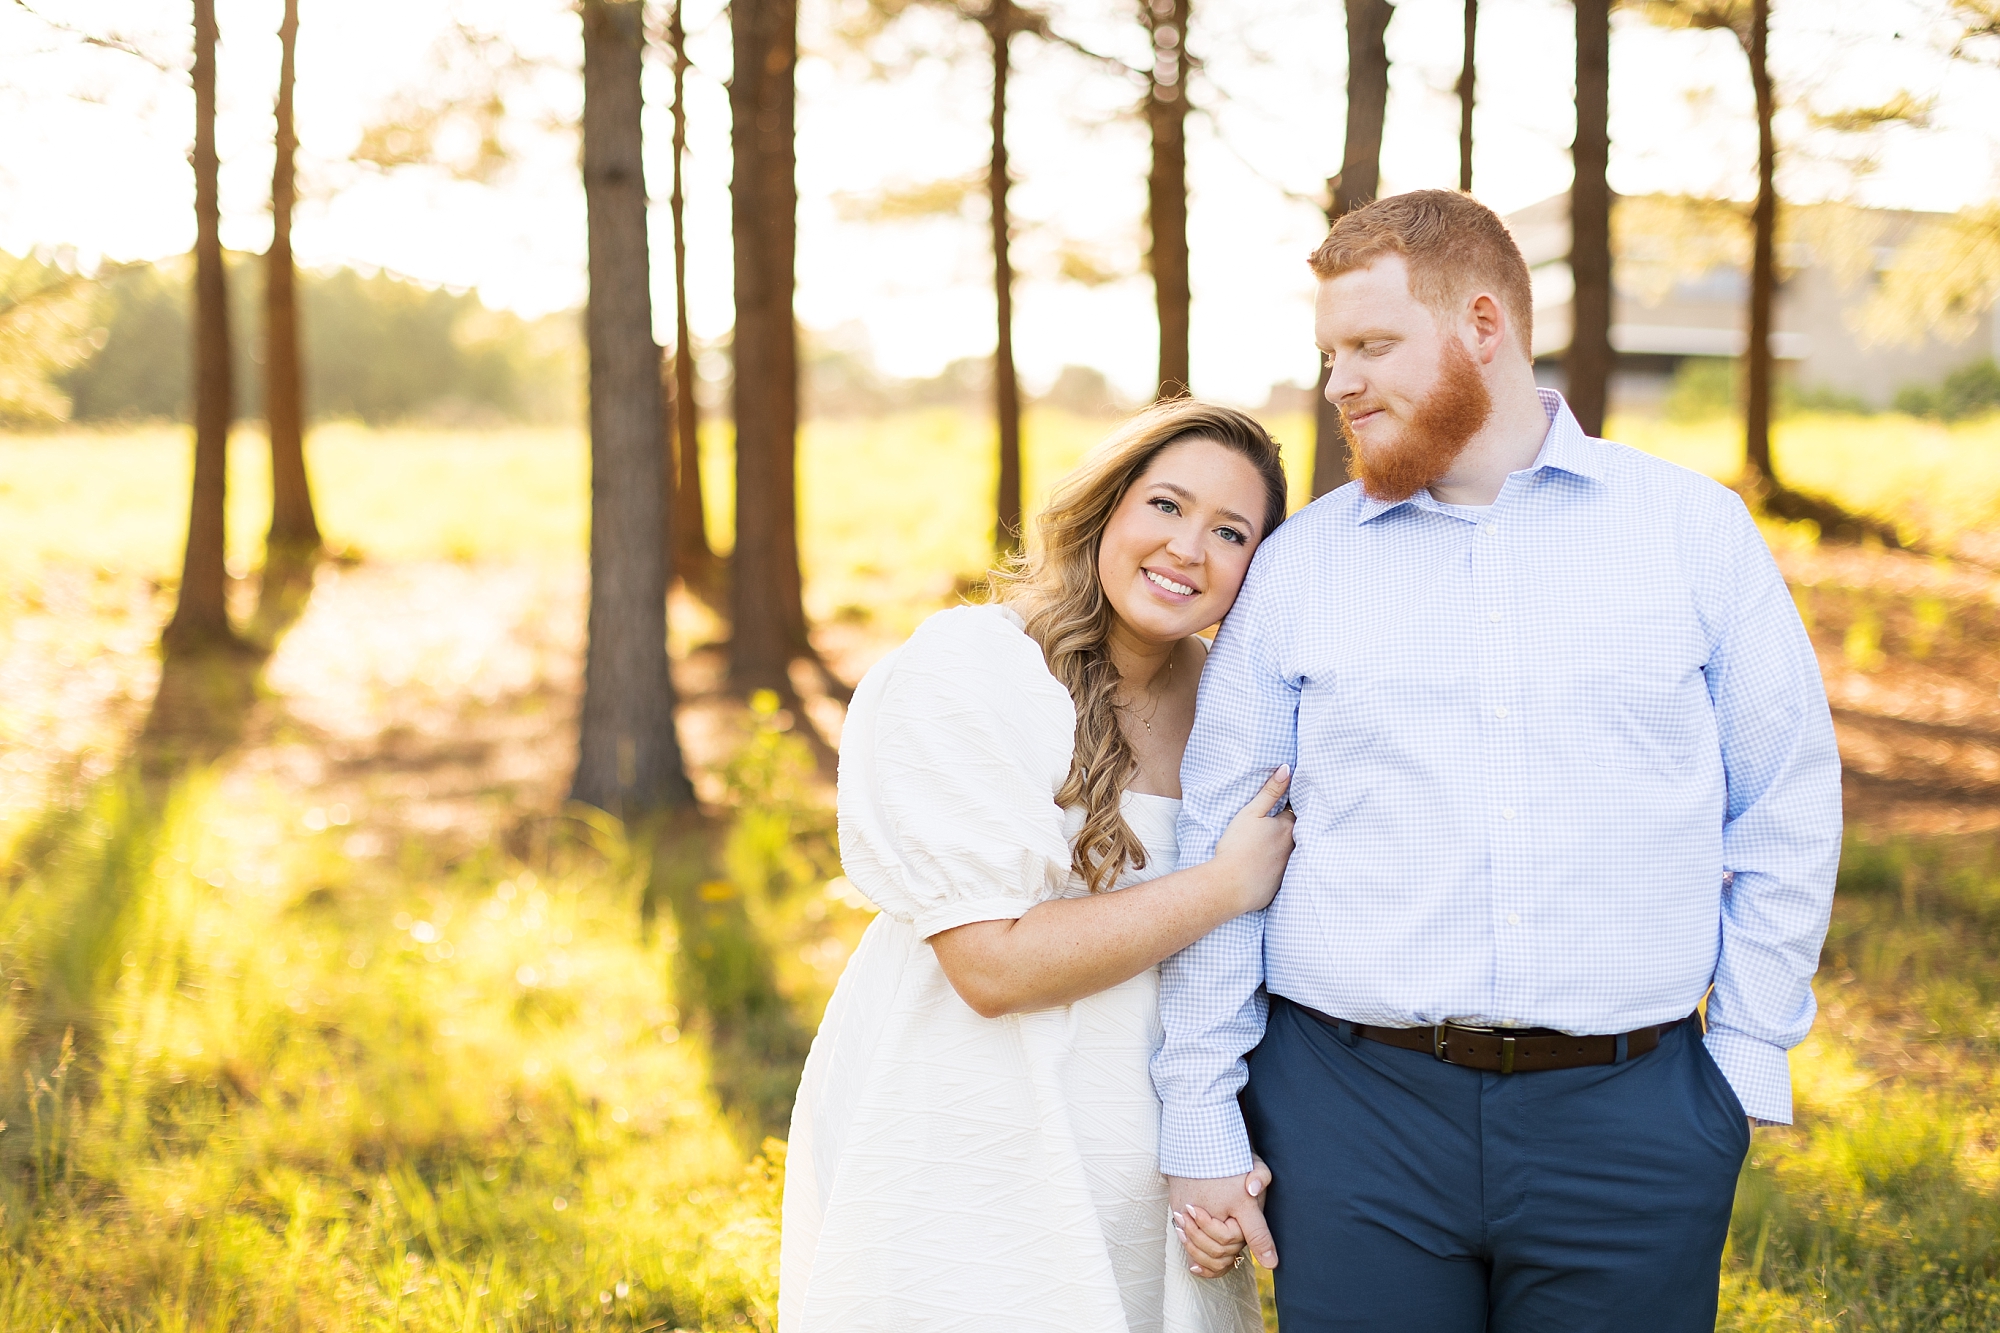 North Carolina Museum of Art engagement photos in a field of tall grass with willow trees | Raleigh NC Engagement Photographer